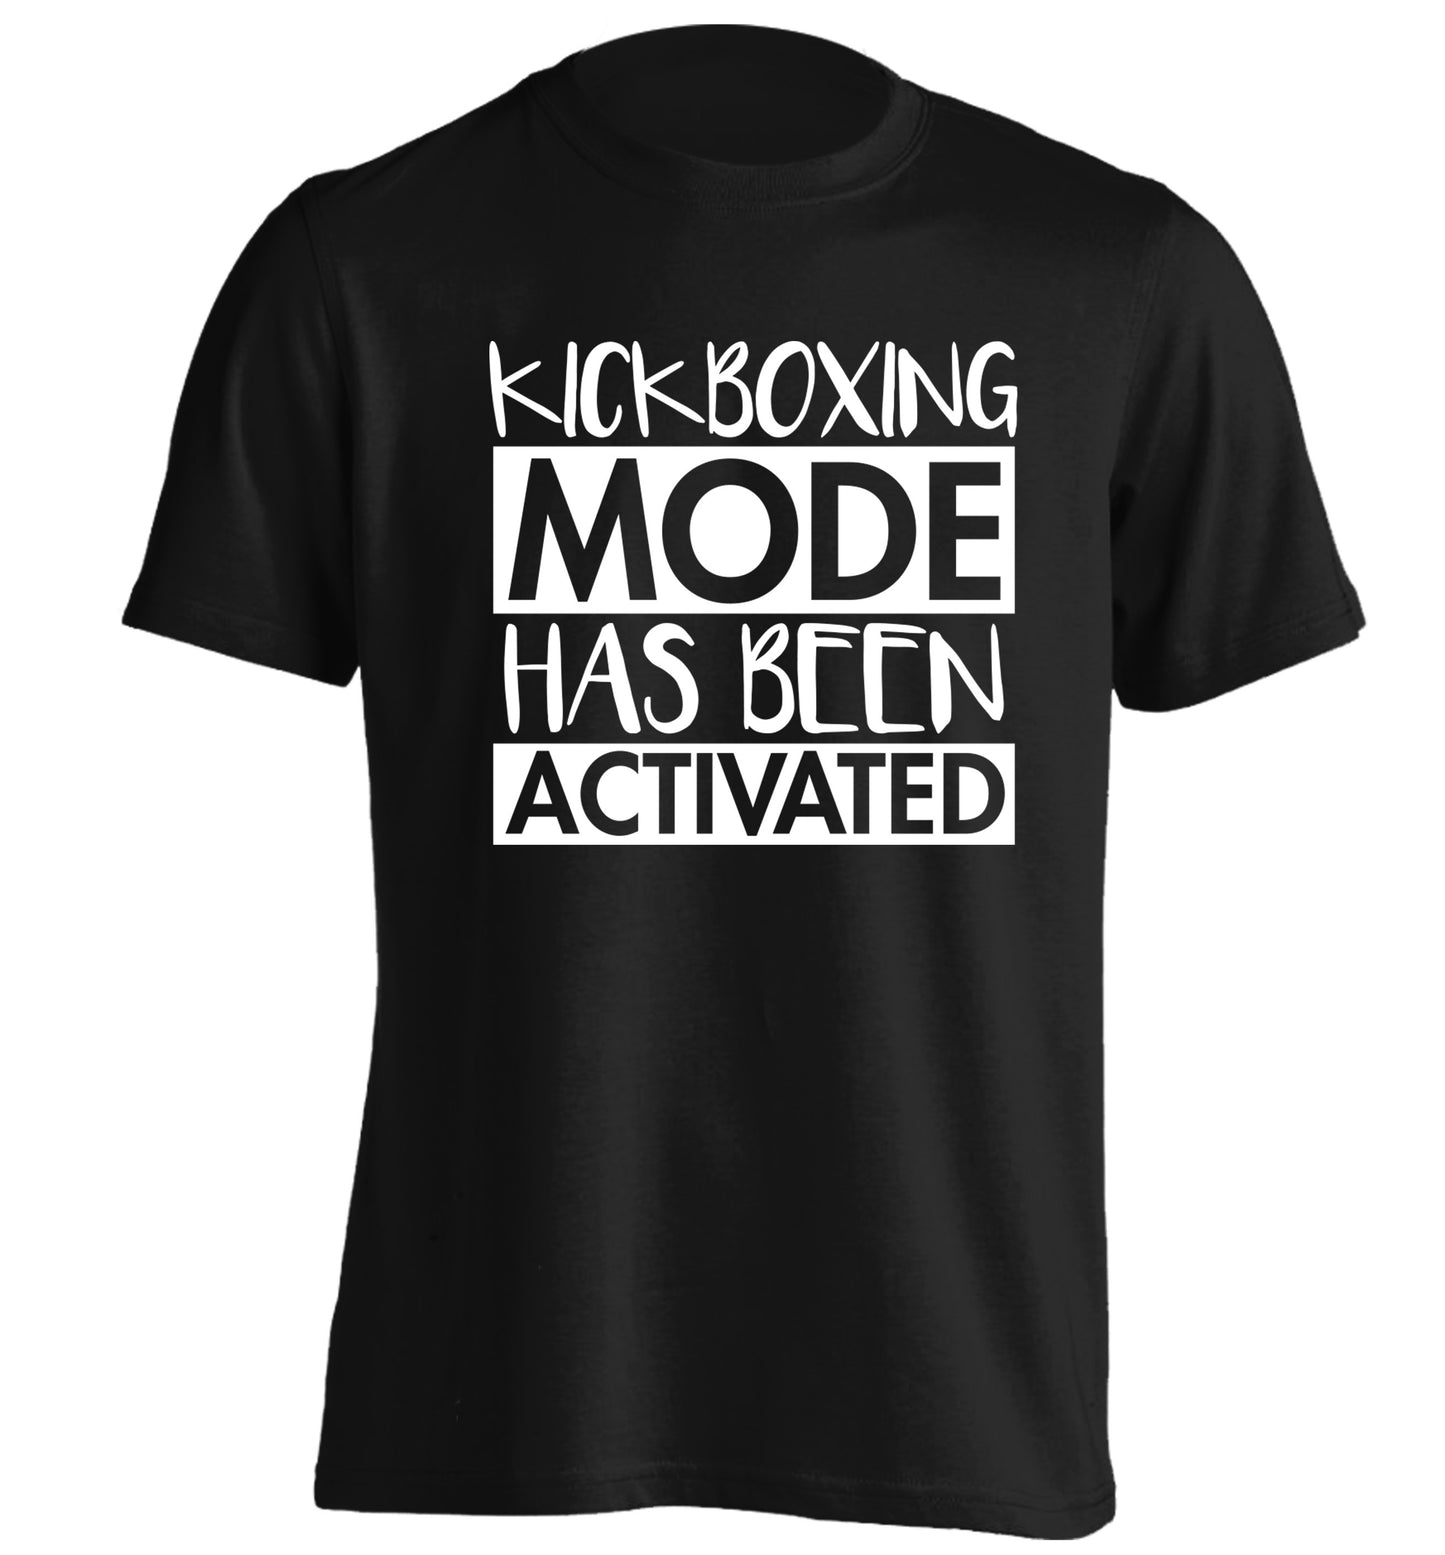 Kickboxing mode activated adults unisex black Tshirt 2XL